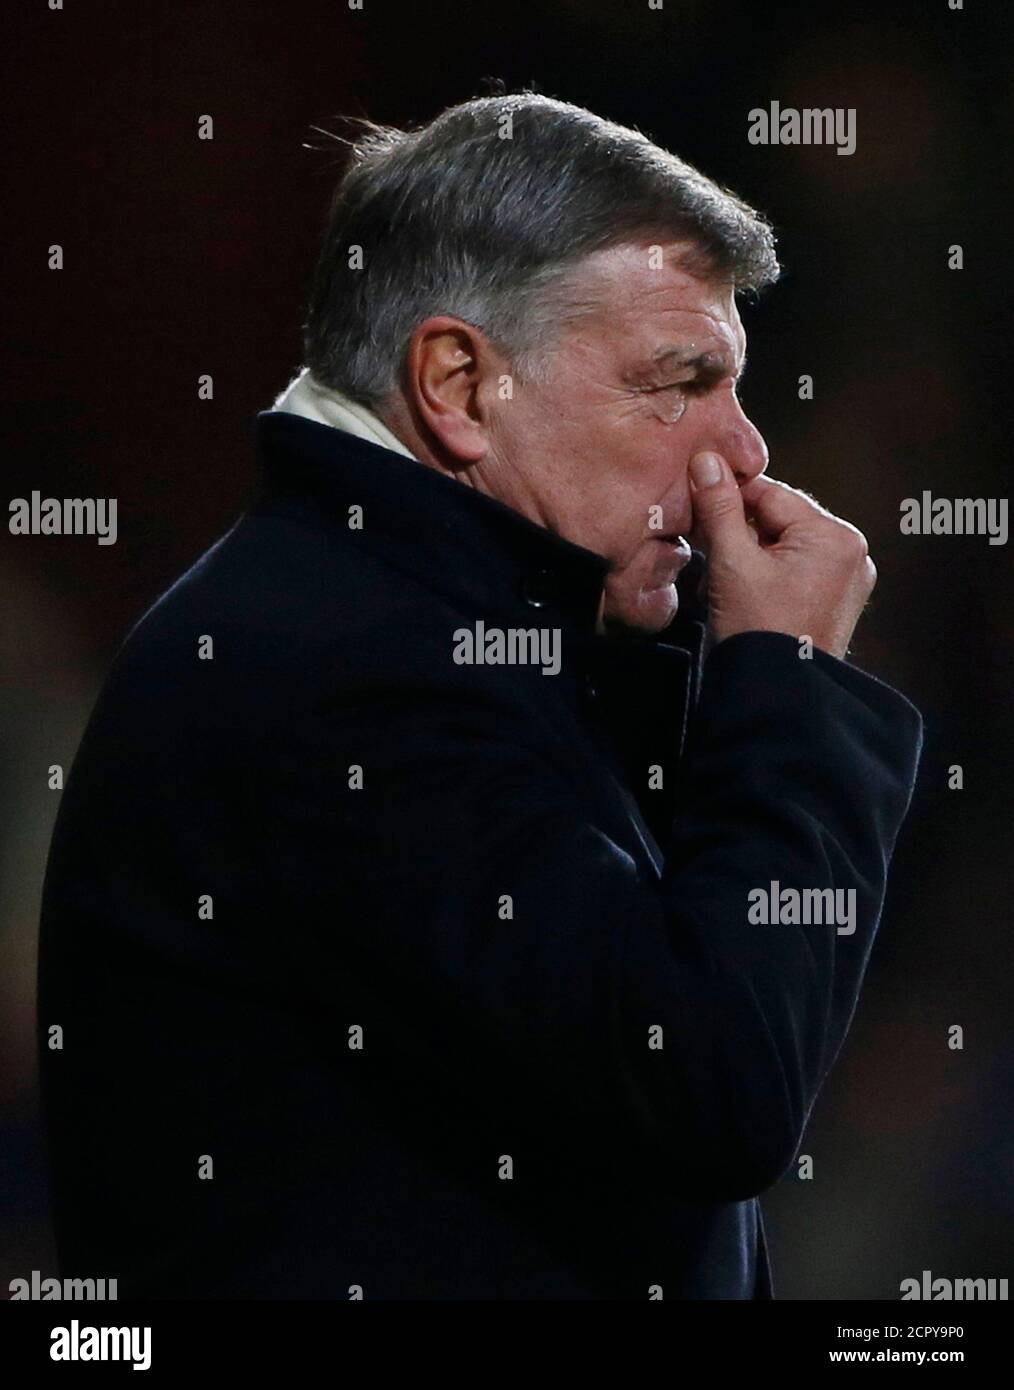 West Ham United's manager Sam Allardyce reacts during their English League Cup semi-final second leg soccer match against Manchester City at Boleyn Ground in London January 21, 2014.   REUTERS/Stefan Wermuth (BRITAIN - Tags: SPORT SOCCER) Stock Photo